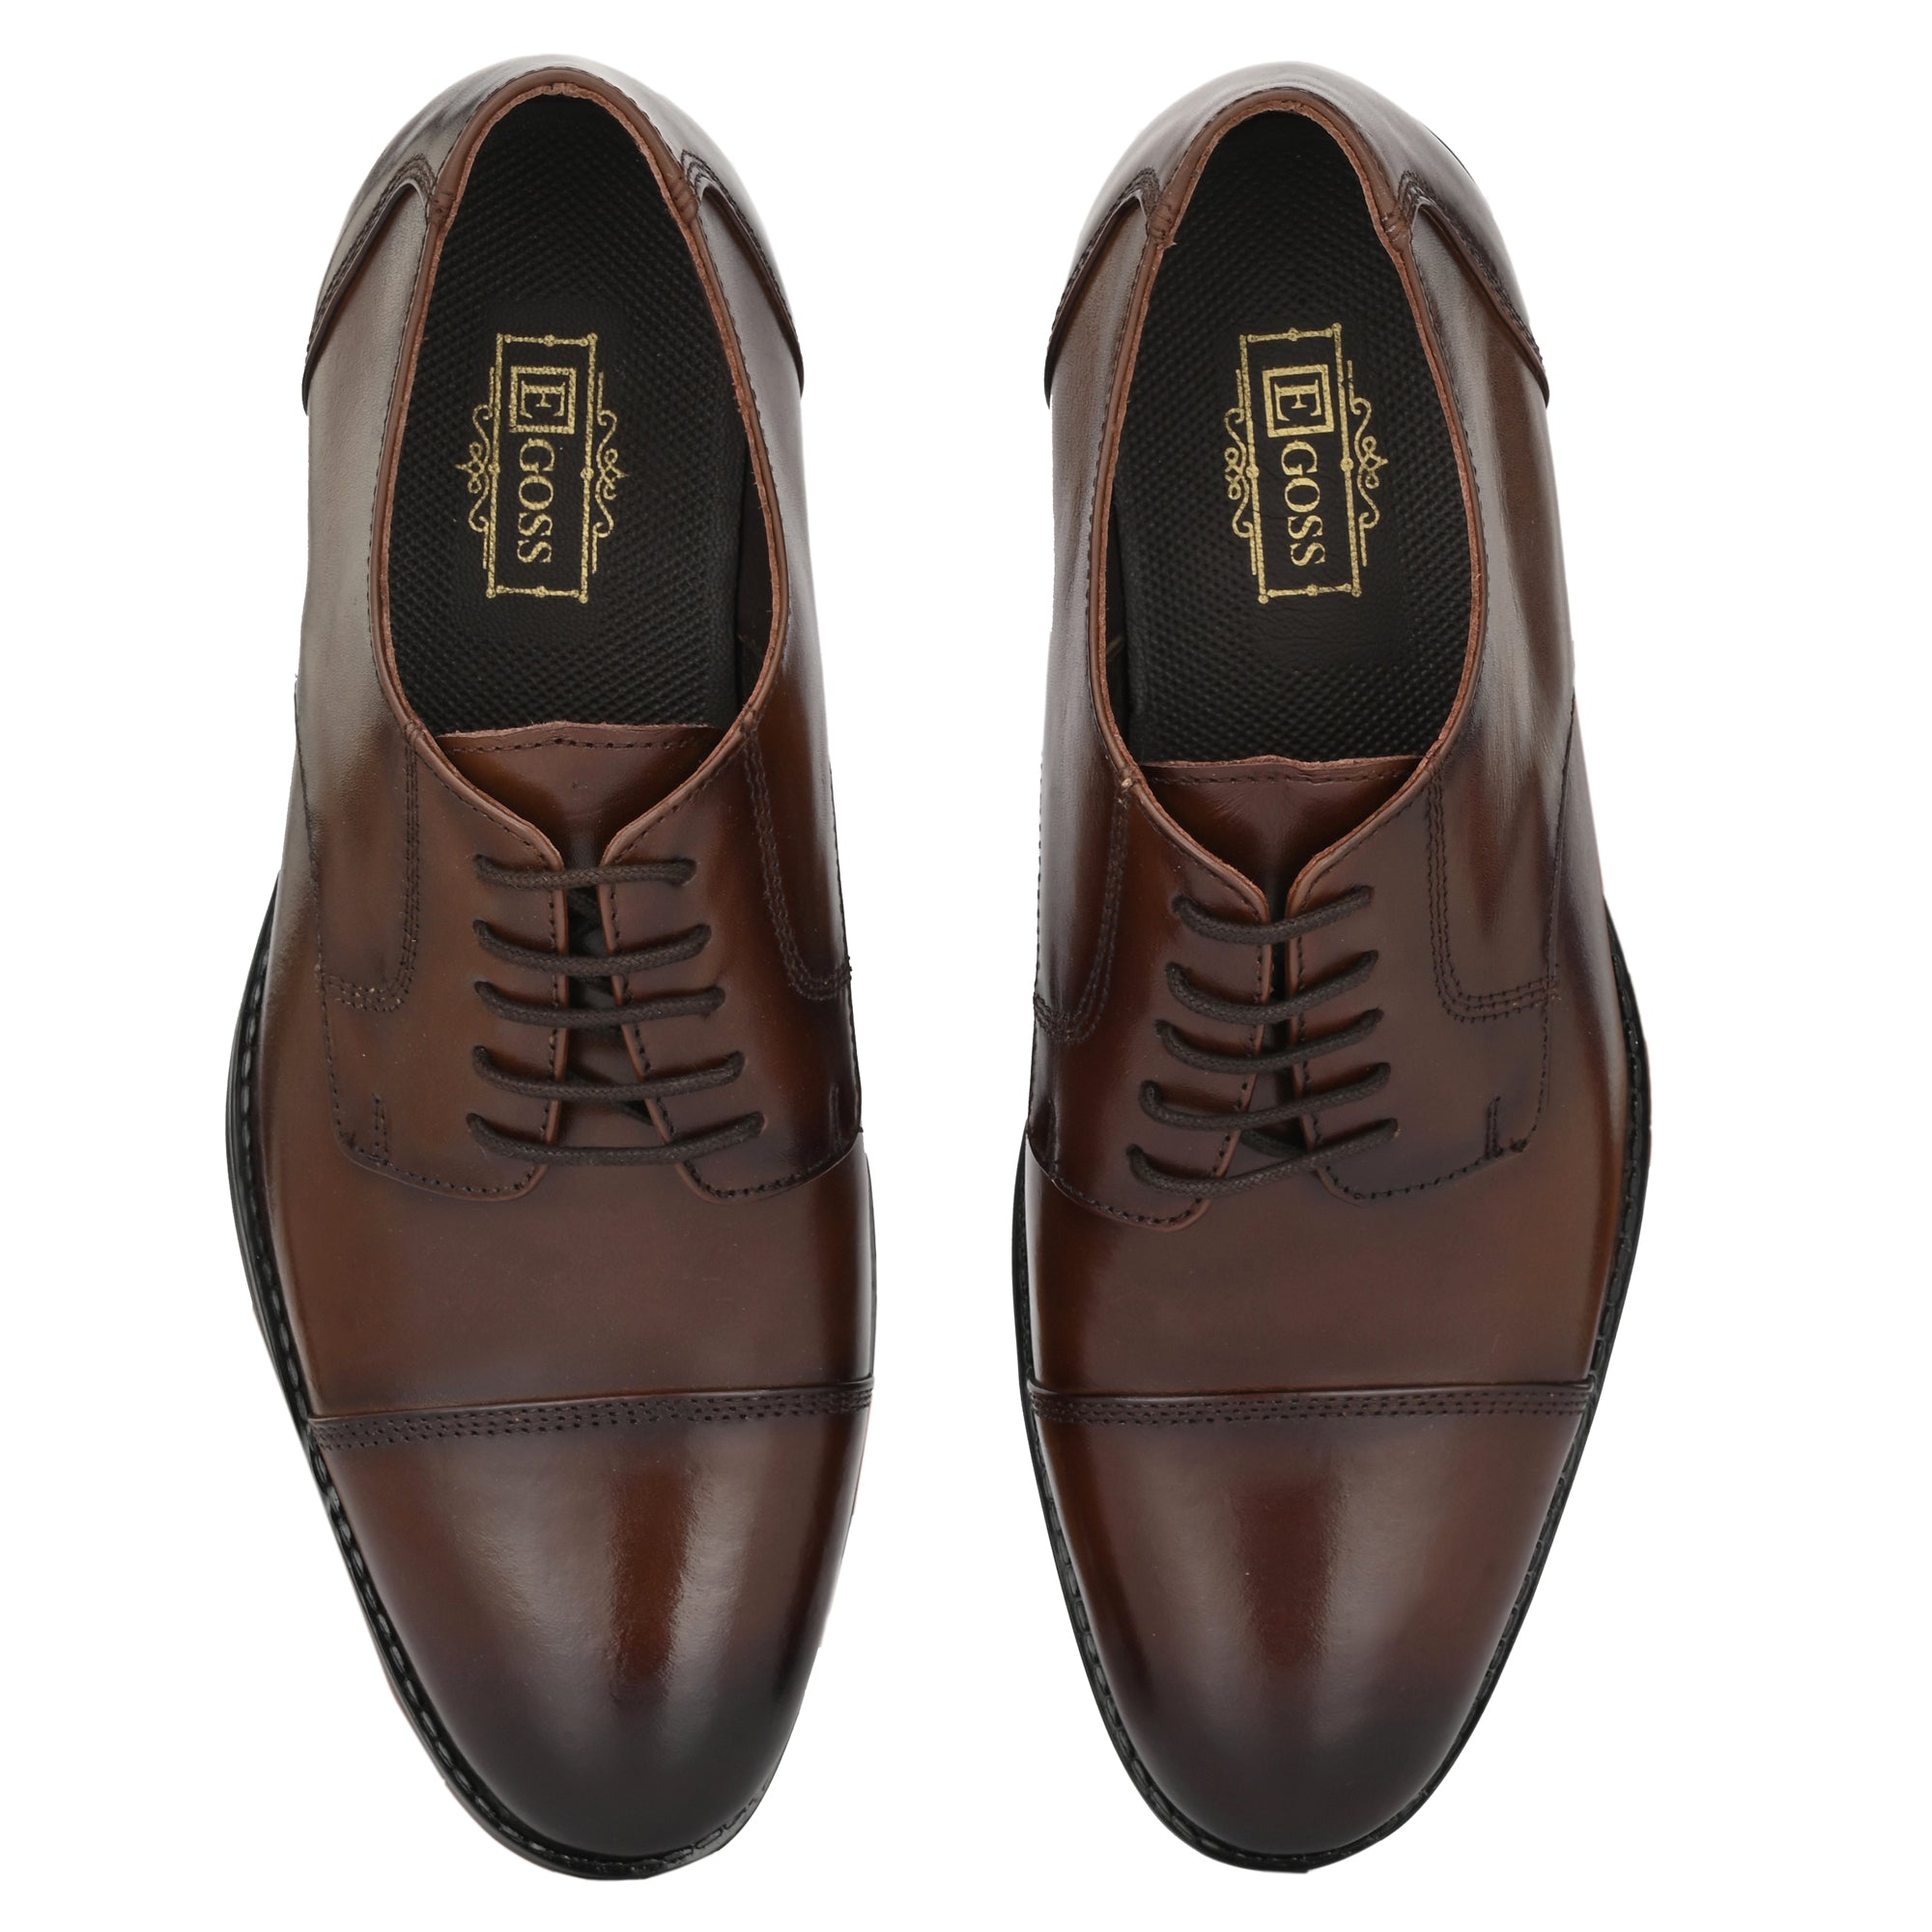 Formal Leather Laceup Shoes For Men